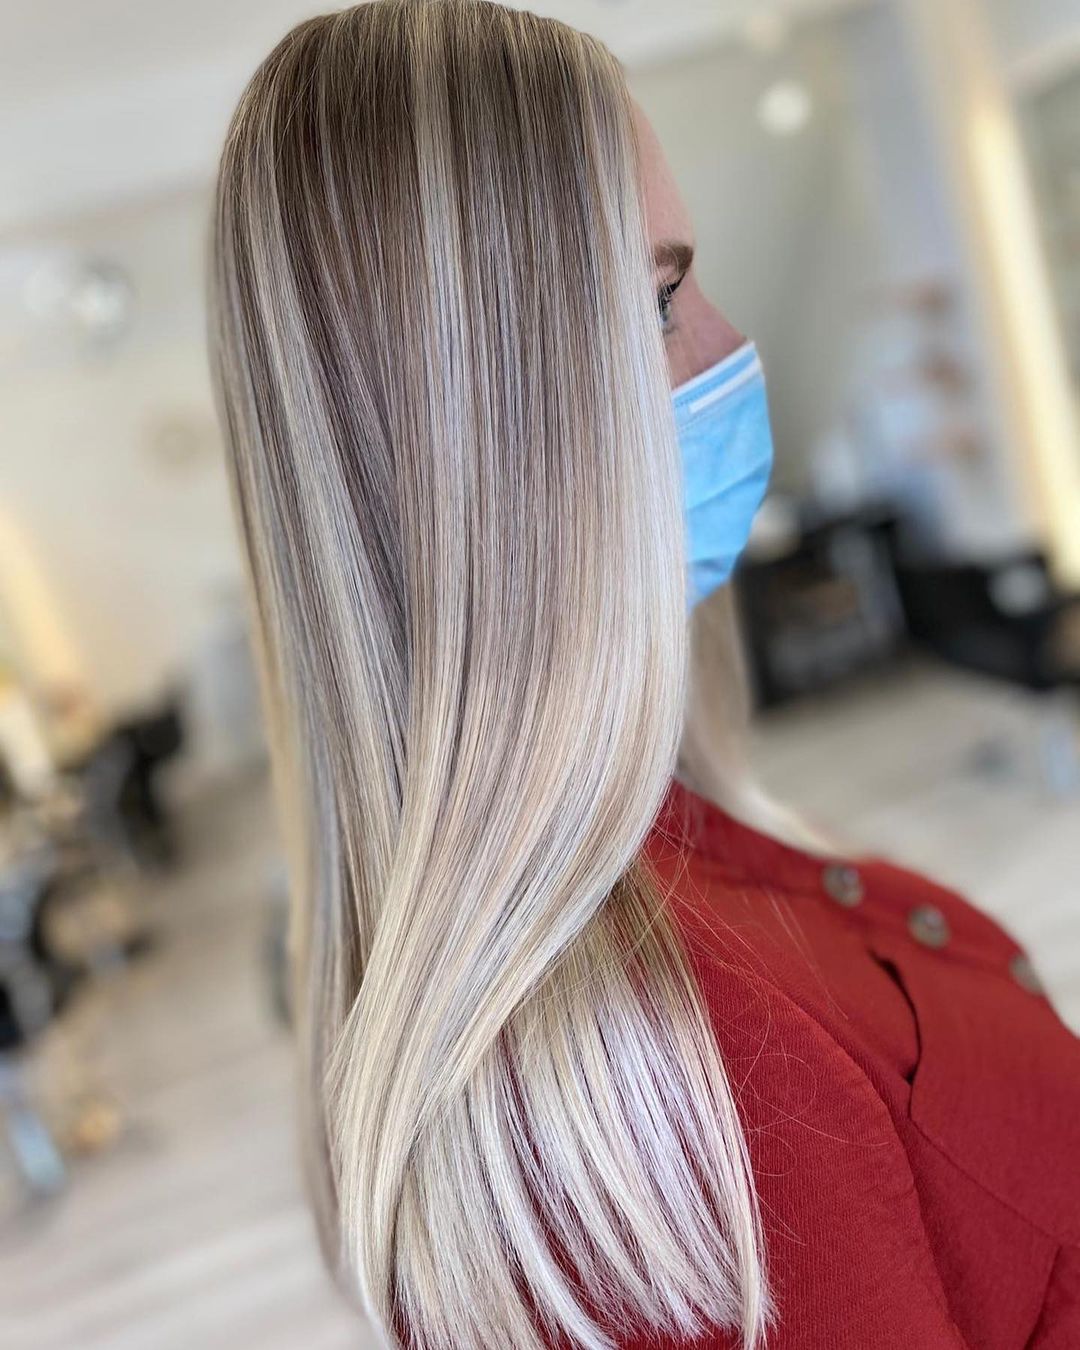 HAIR COLOUR WITHOUT COMMITMENT AT AMOUR HAIR SALON IN SALFORD